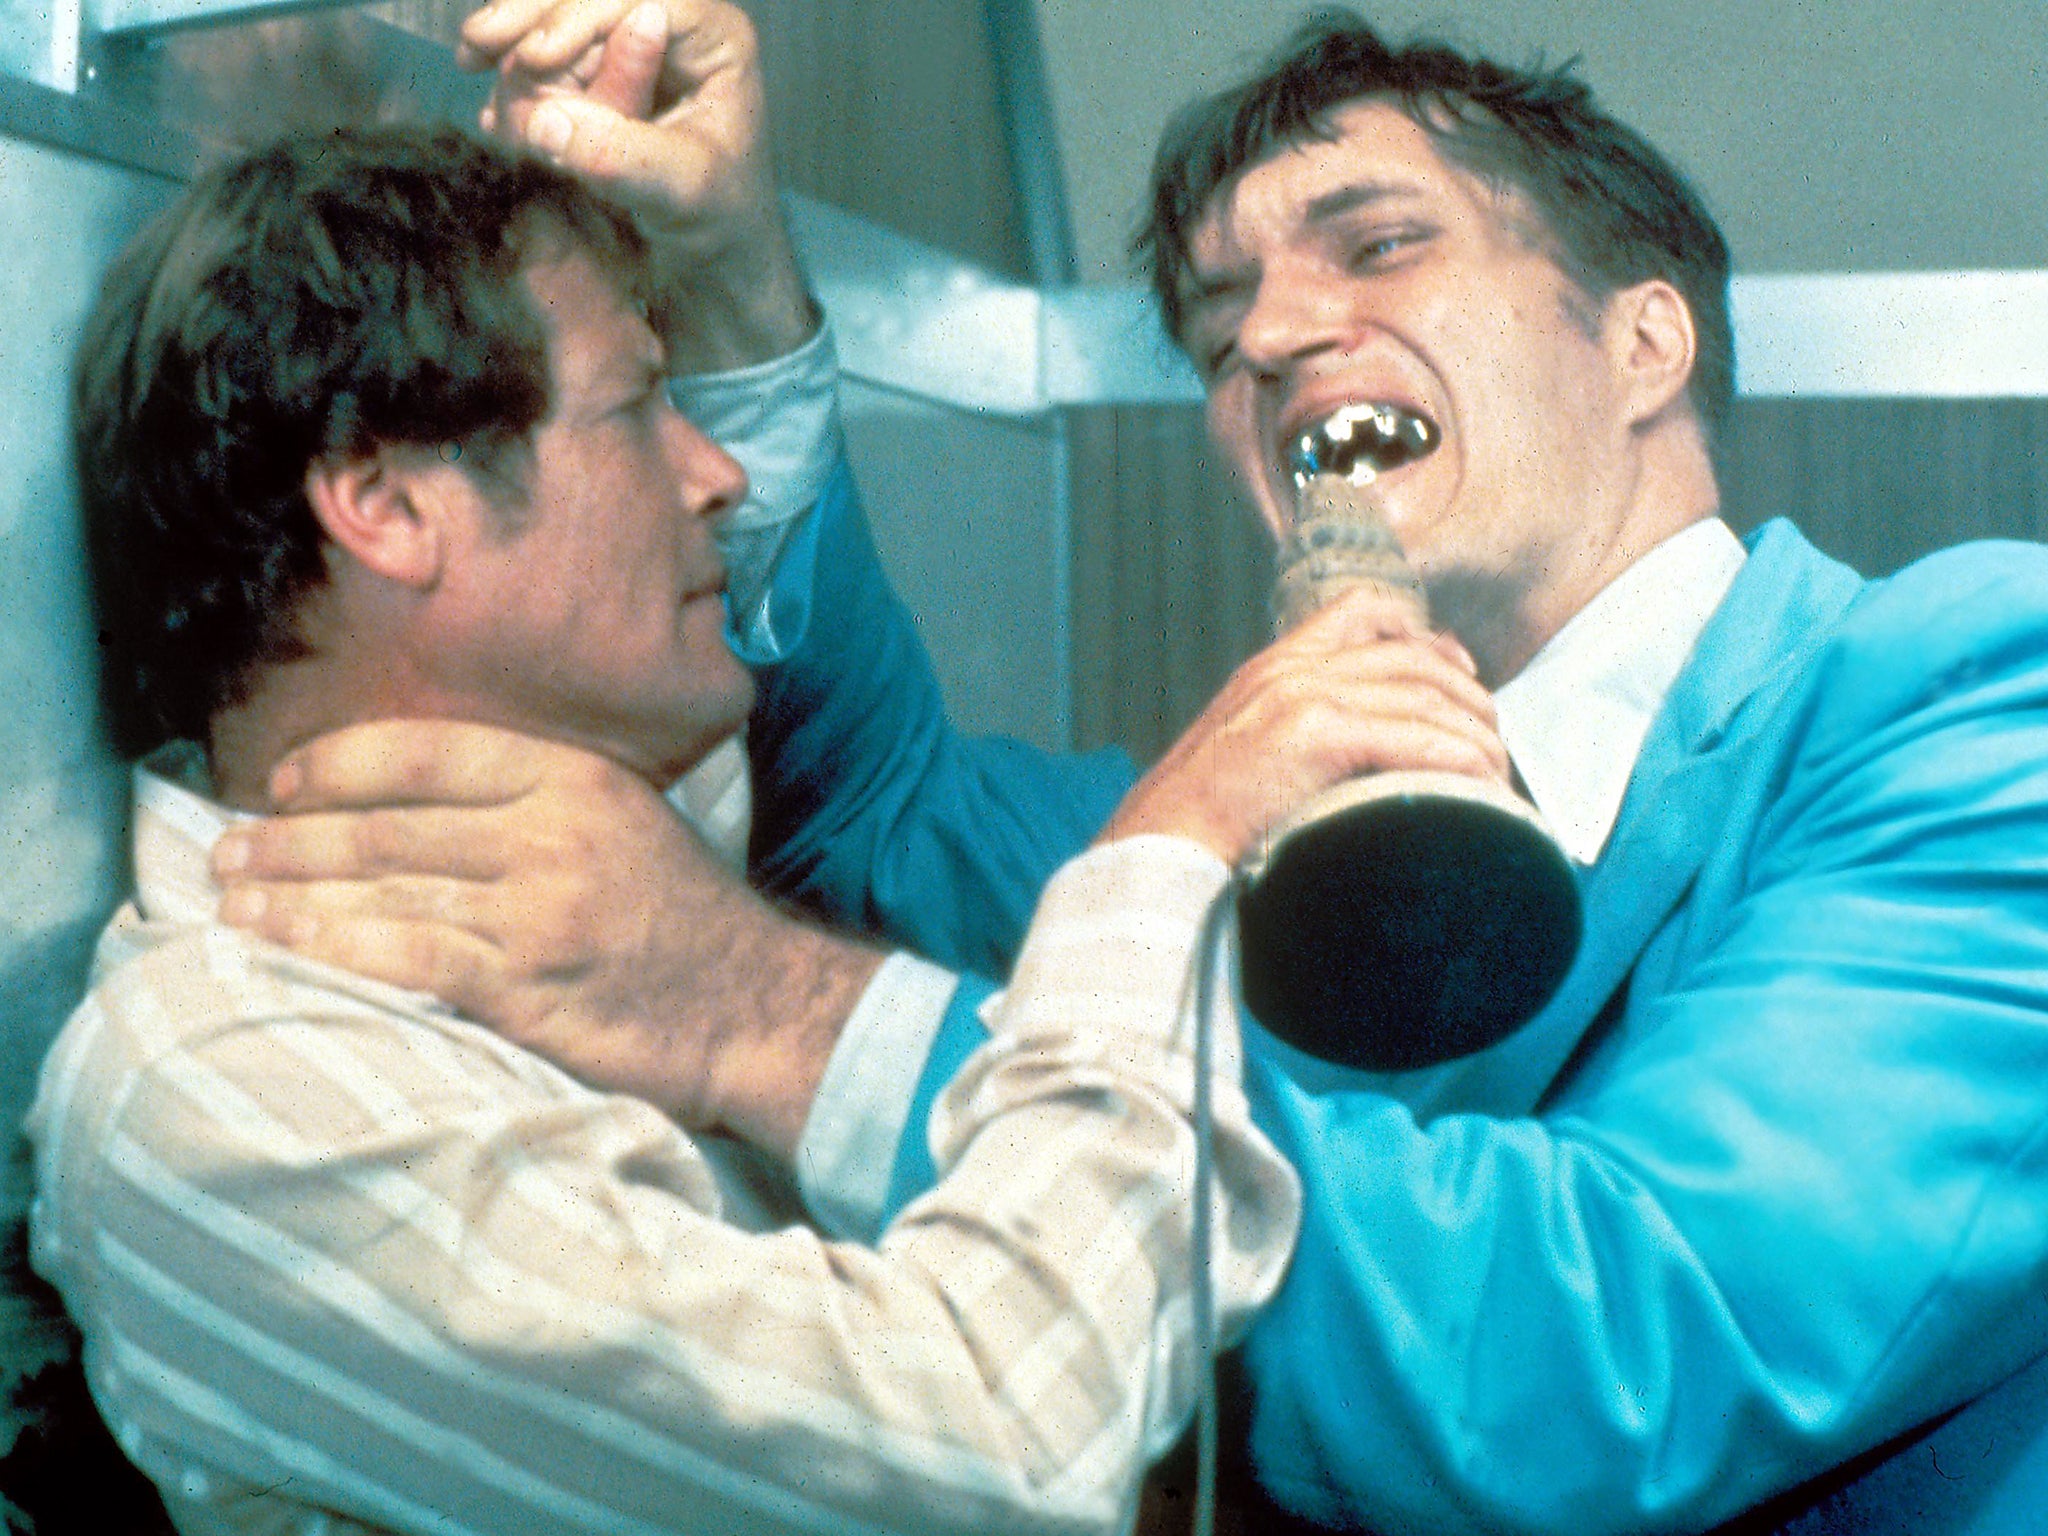 Roger Moore and Richard Kiel’s Jaws in 'The Spy Who Loved Me'